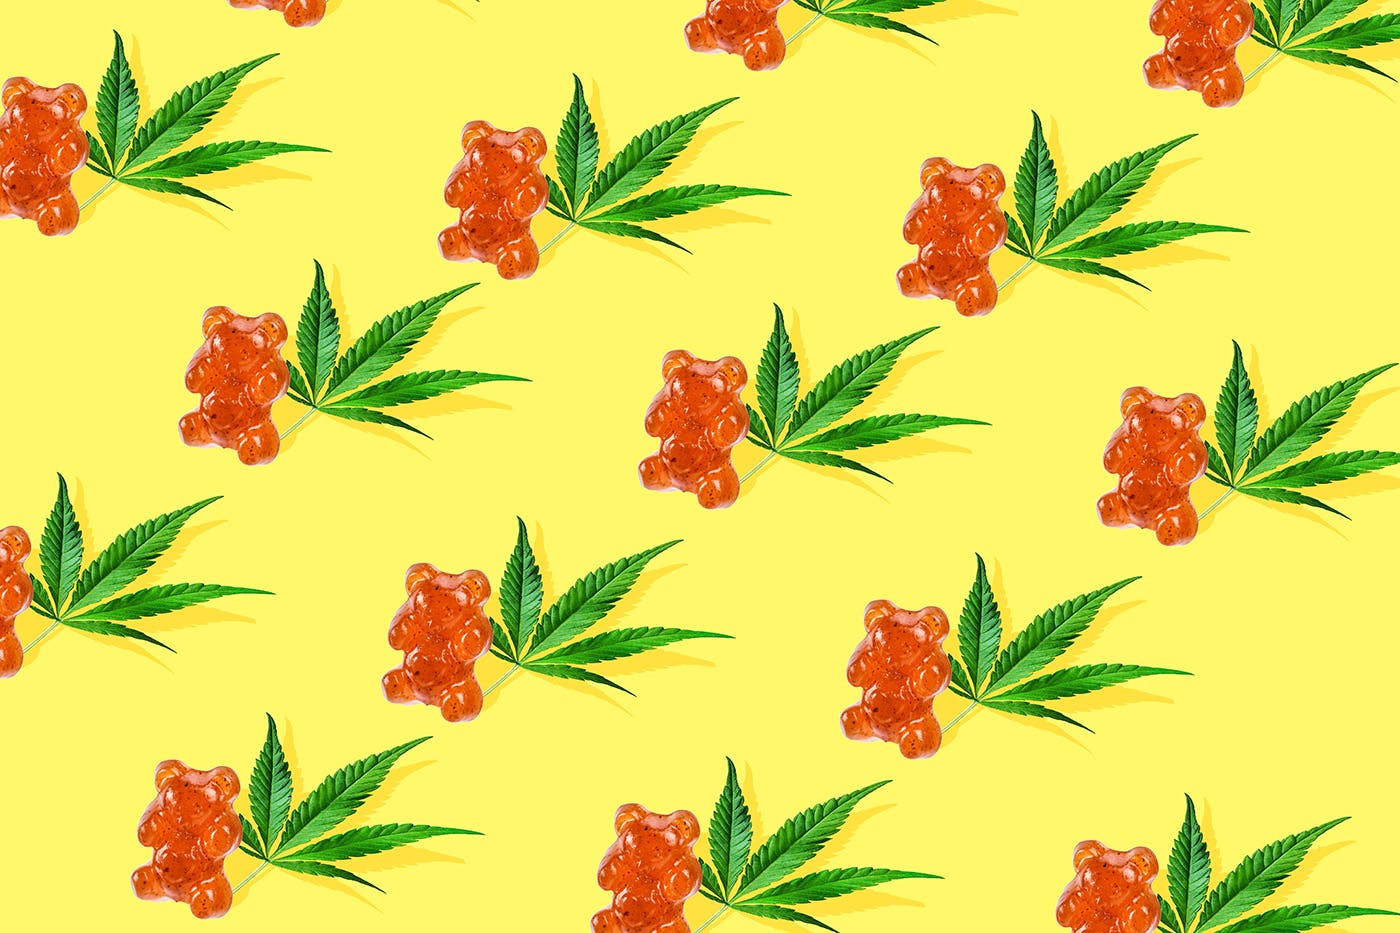 Delta 8 gummies on yellow background with leaves